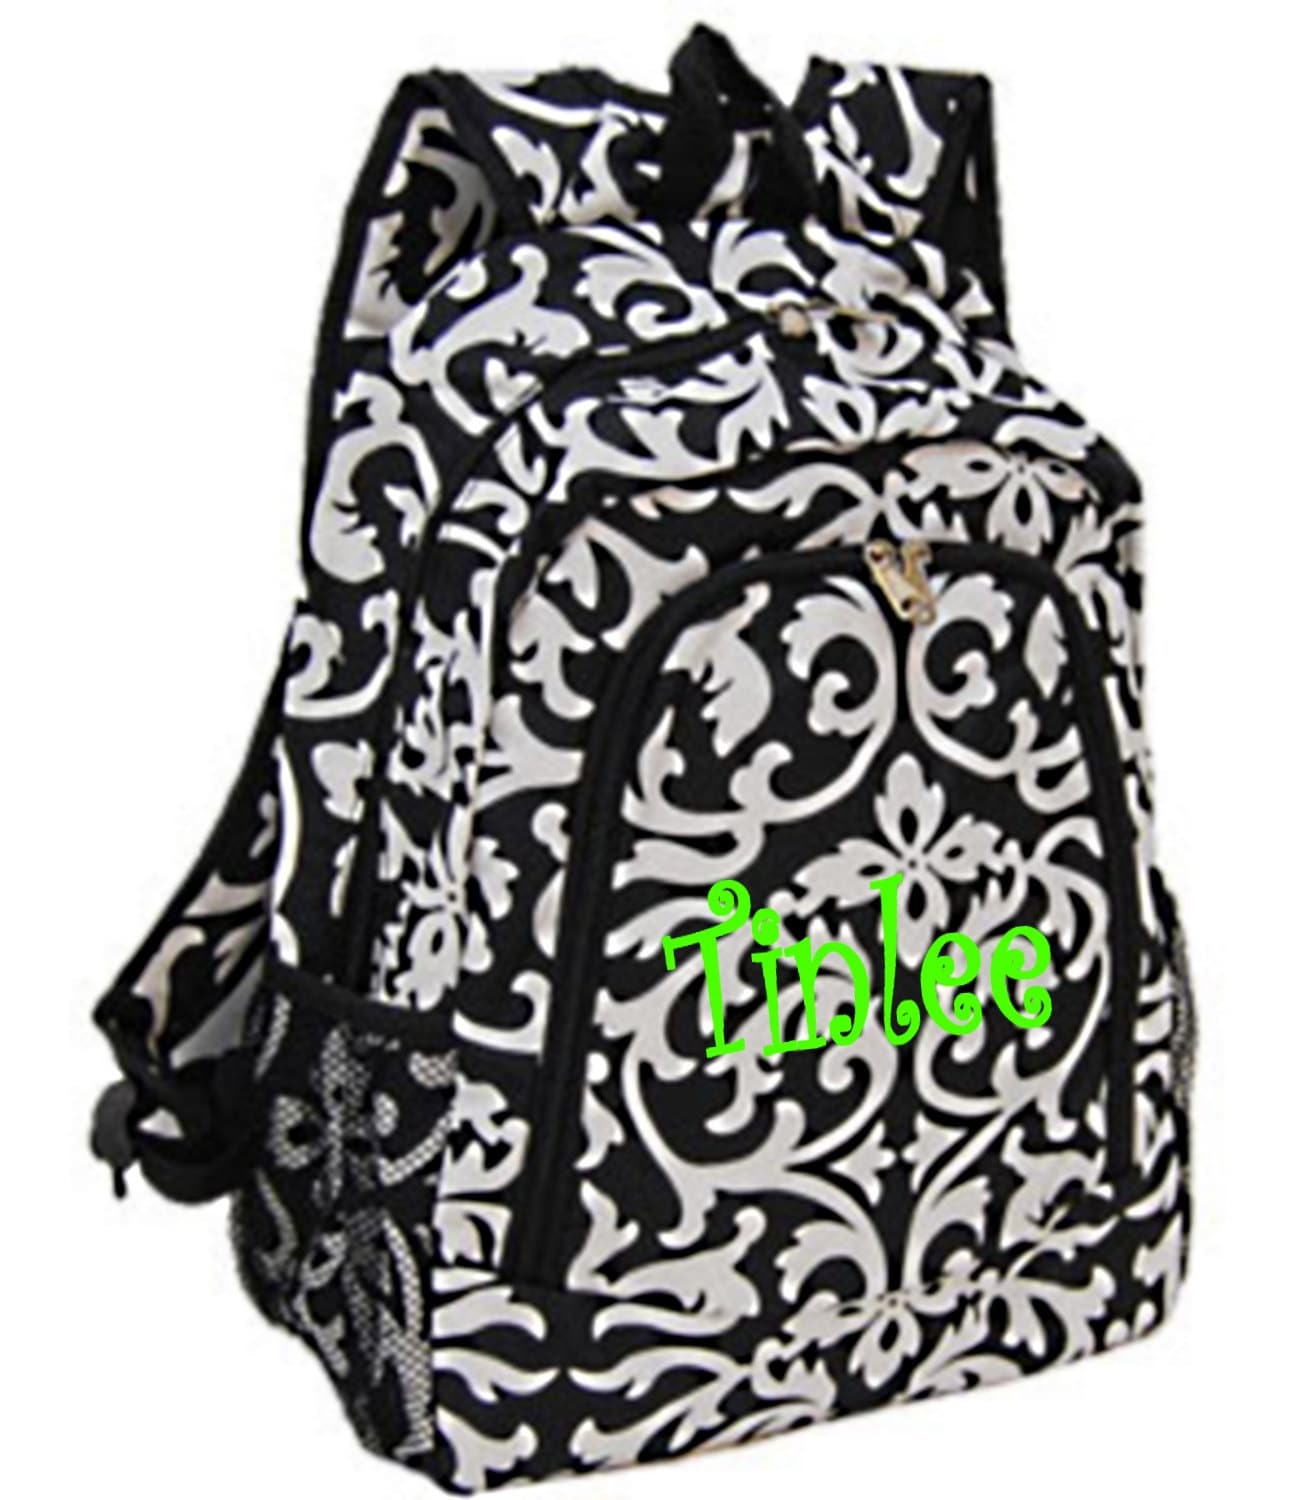 Personalized Backpack girls damask canvas black and white